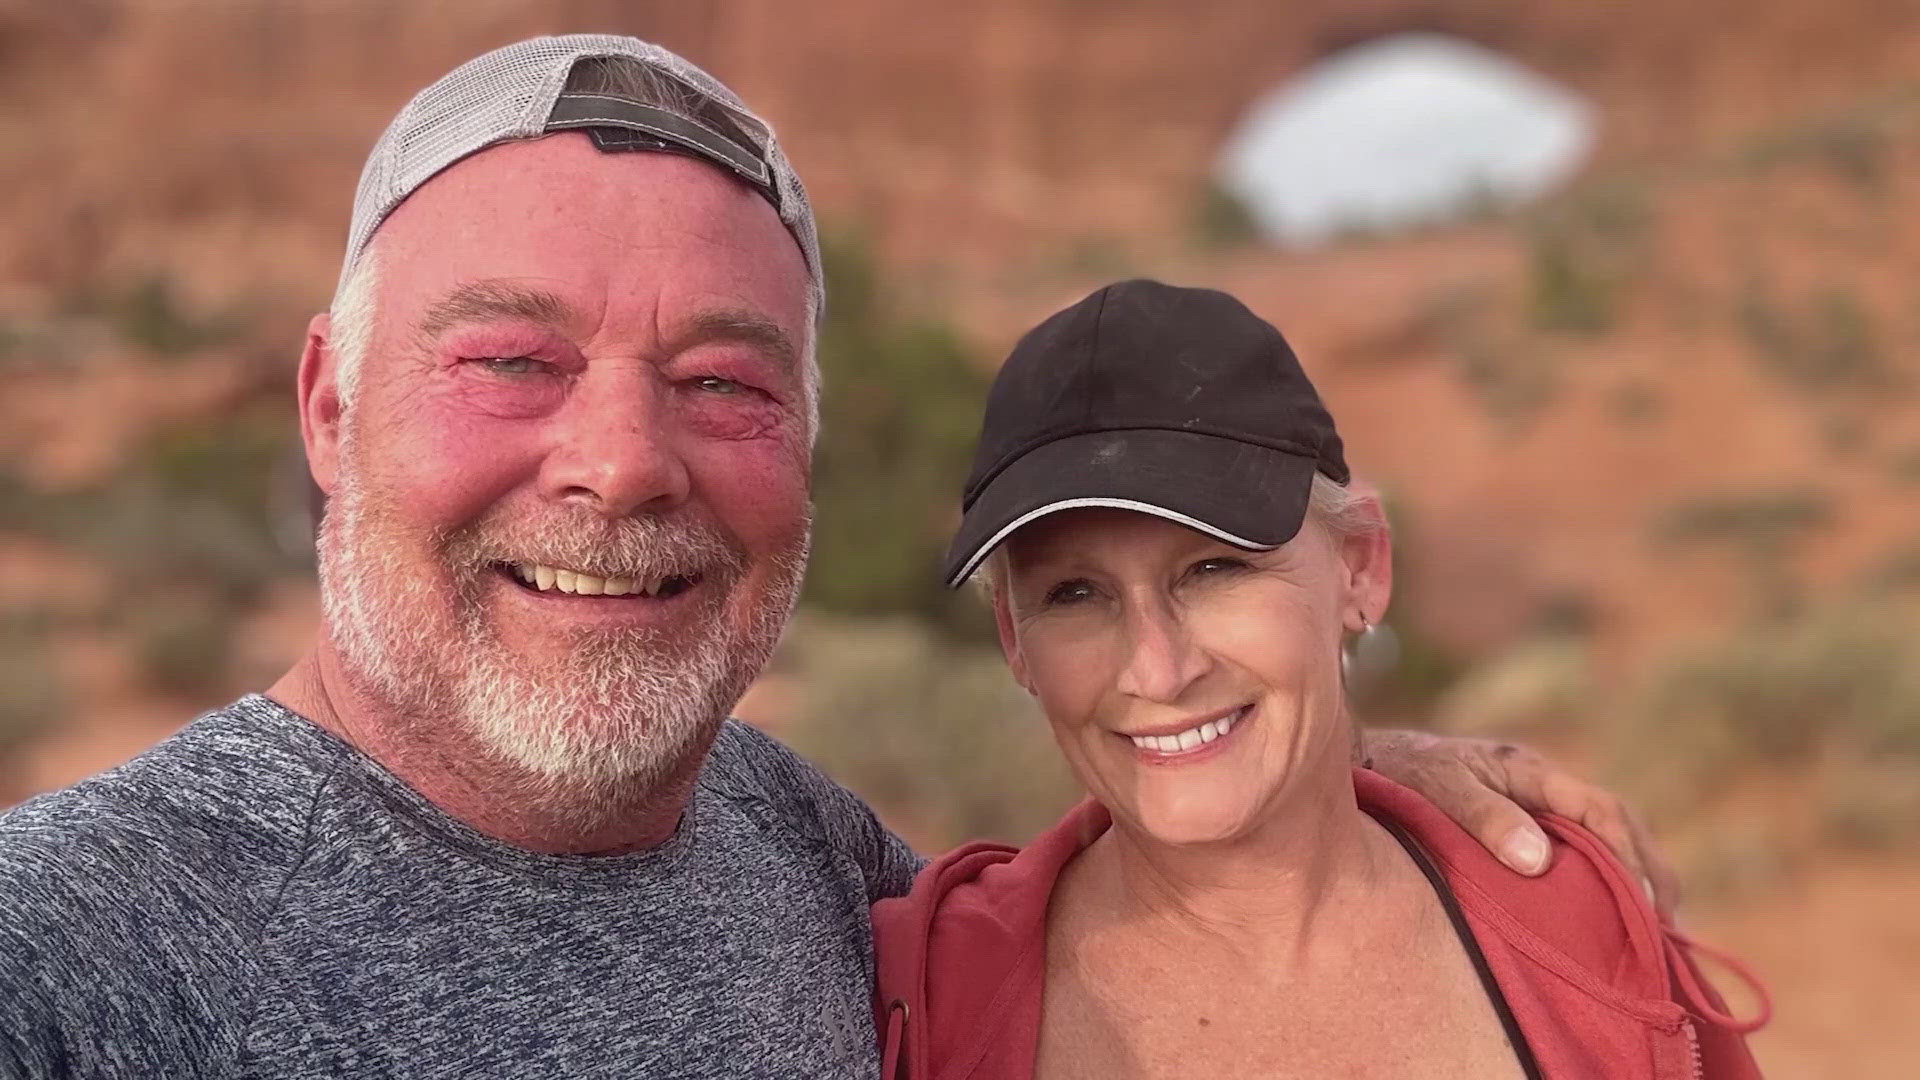 Ray, 58, and Maranda, 50, Ankofski were reported missing on June 21 after they didn't return as scheduled from Steel Bender, a popular off-roading trail.